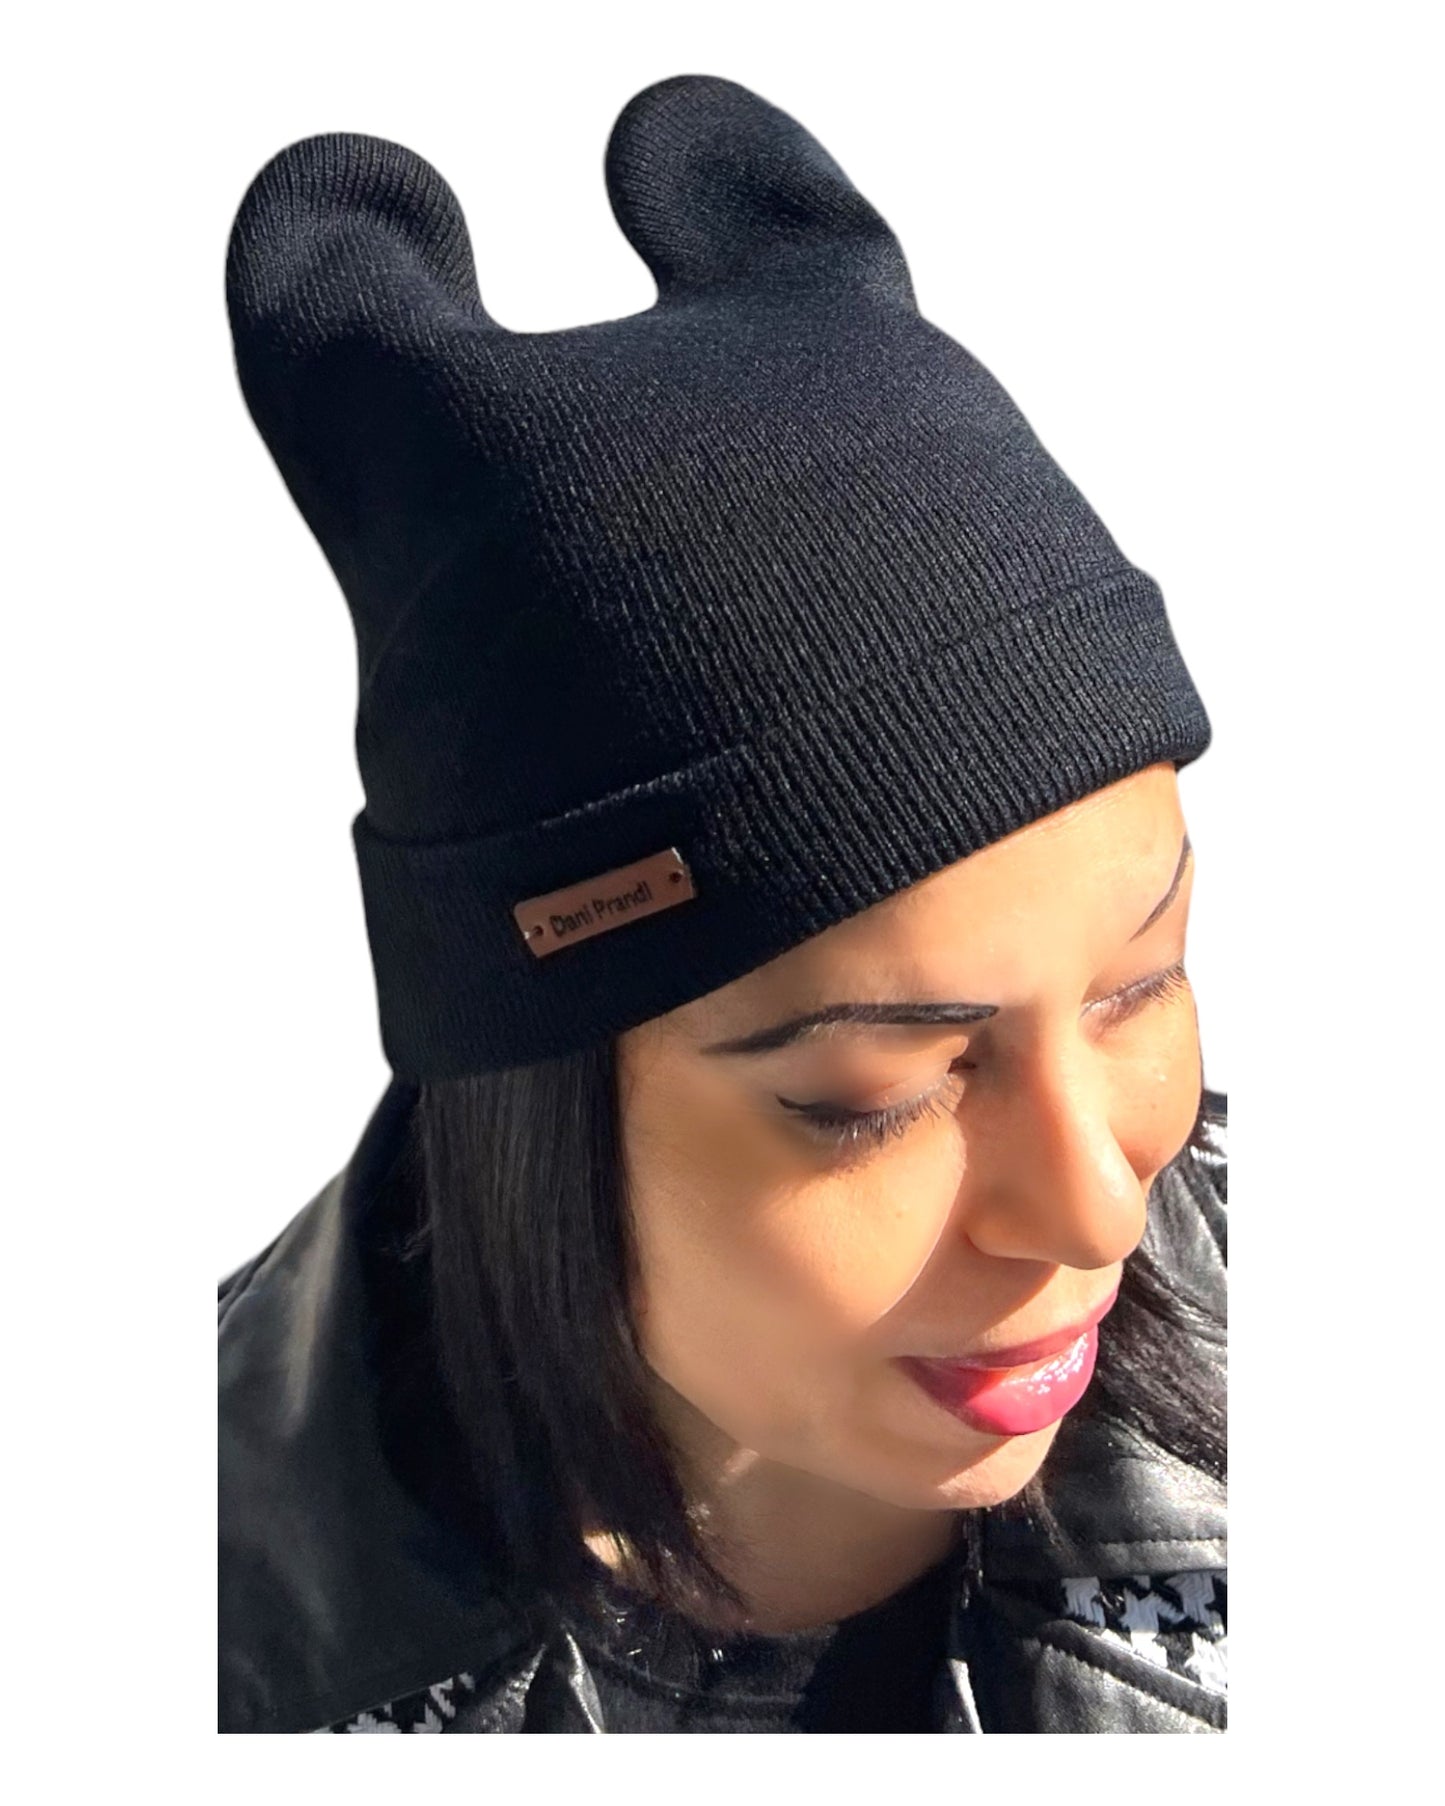 Beanie Hat with Cat Ears, adding playful feline flair to your look. Crafted from comfortable acrylic material, this hat is designed for warmth and style. The cat ears offer a whimsical touch, making it a unique and fashionable accessory.